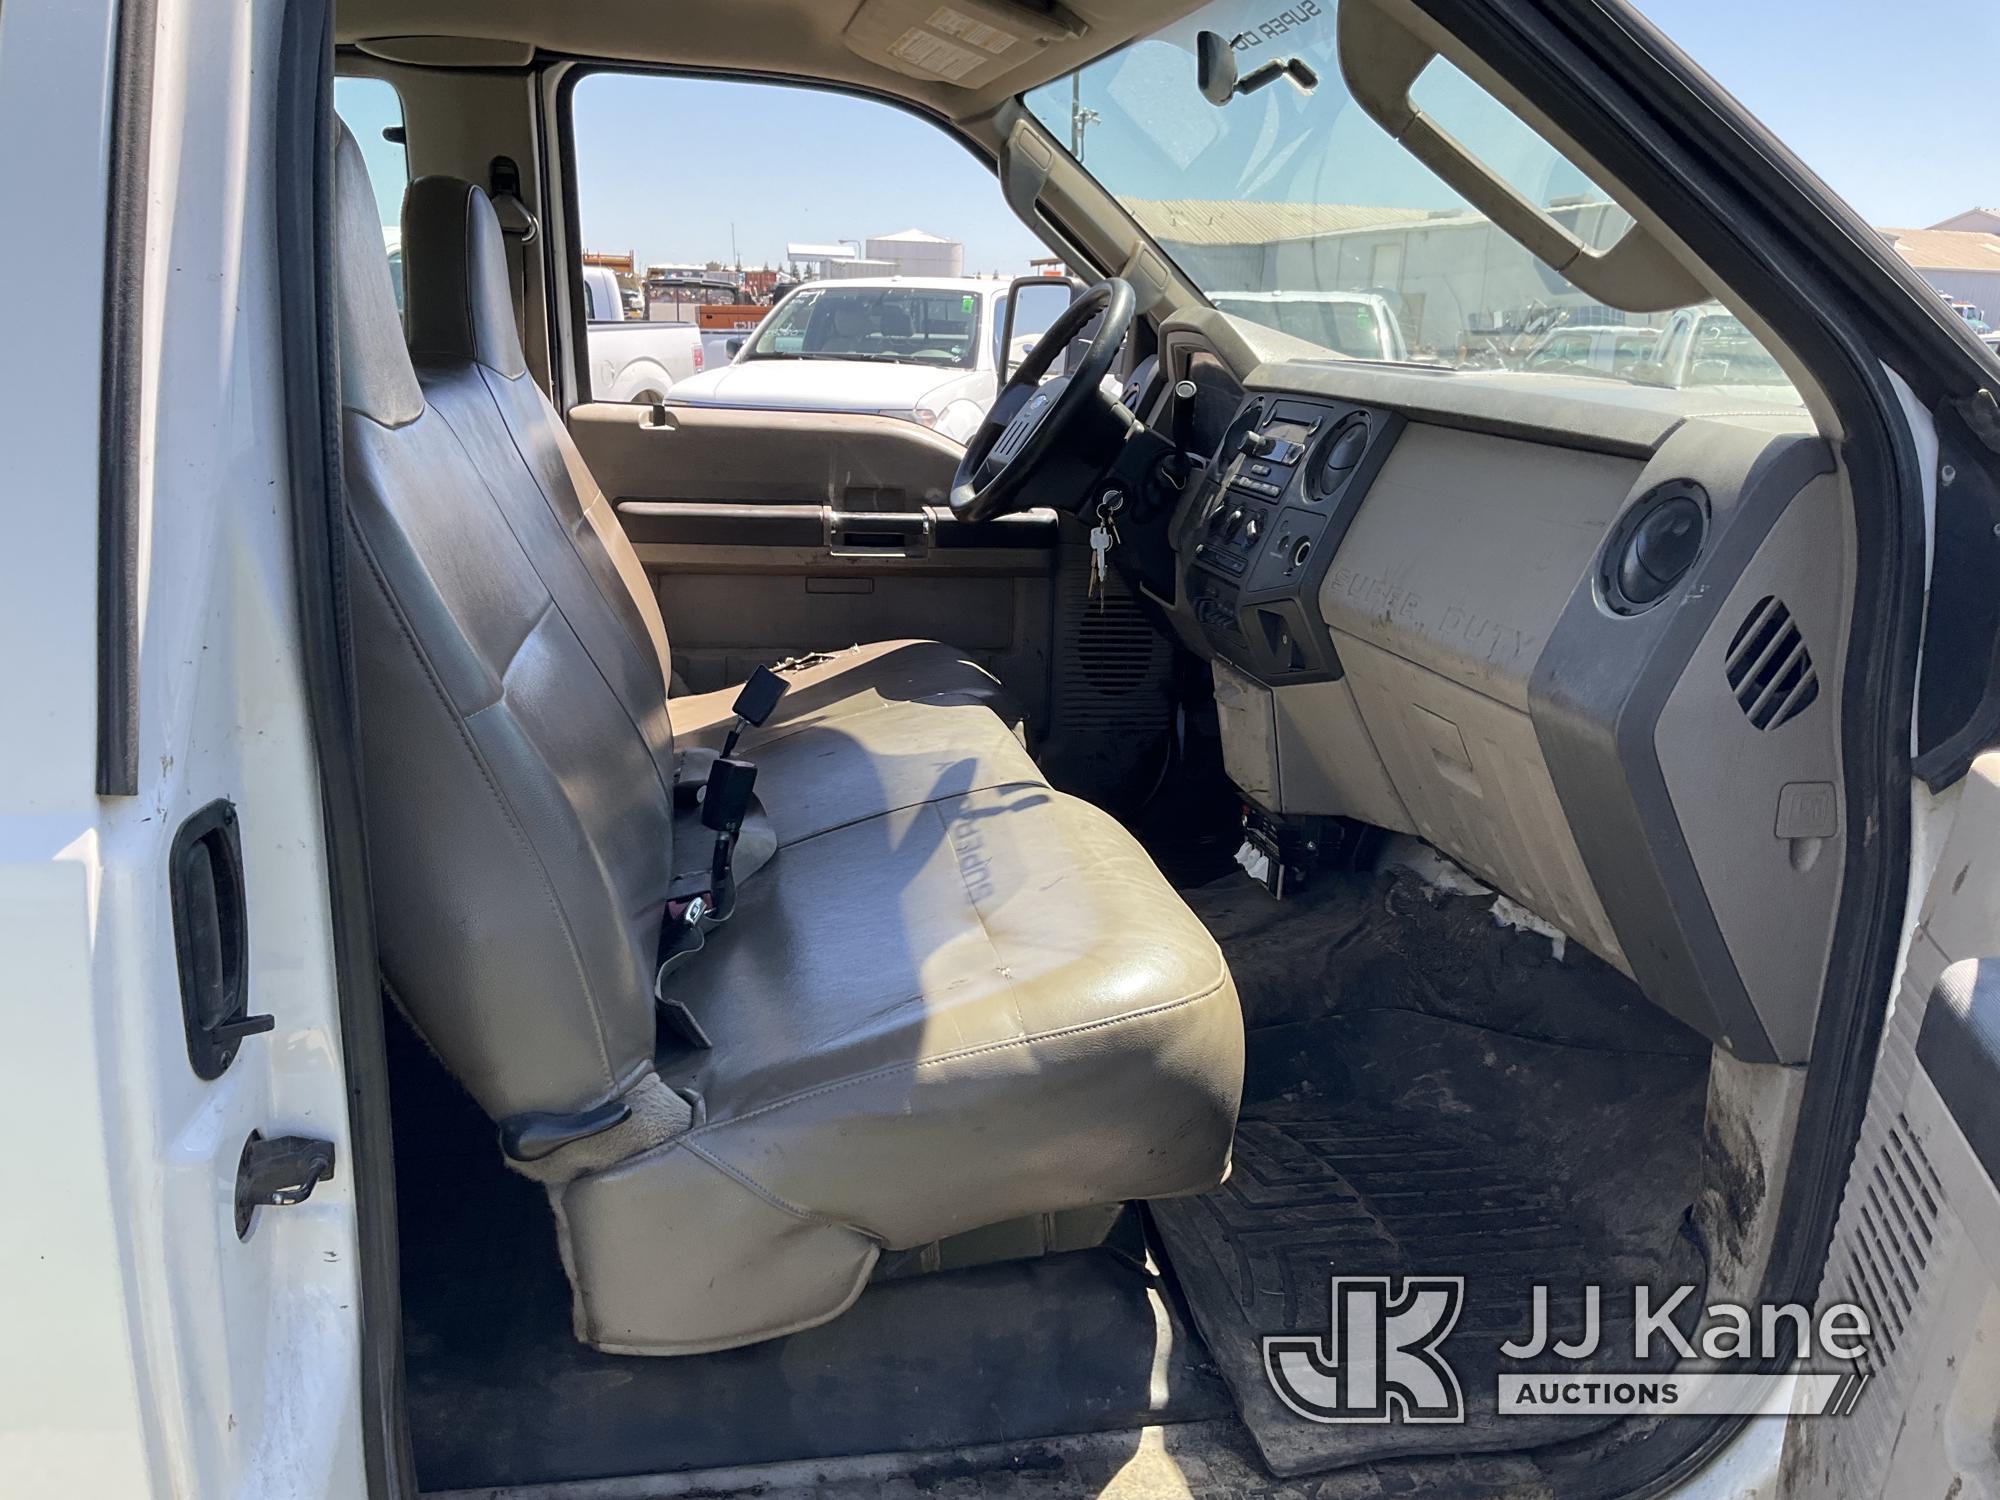 (Dixon, CA) 2008 Ford F350 Extended-Cab Pickup Truck Runs & Moves, Has Check Engine Light